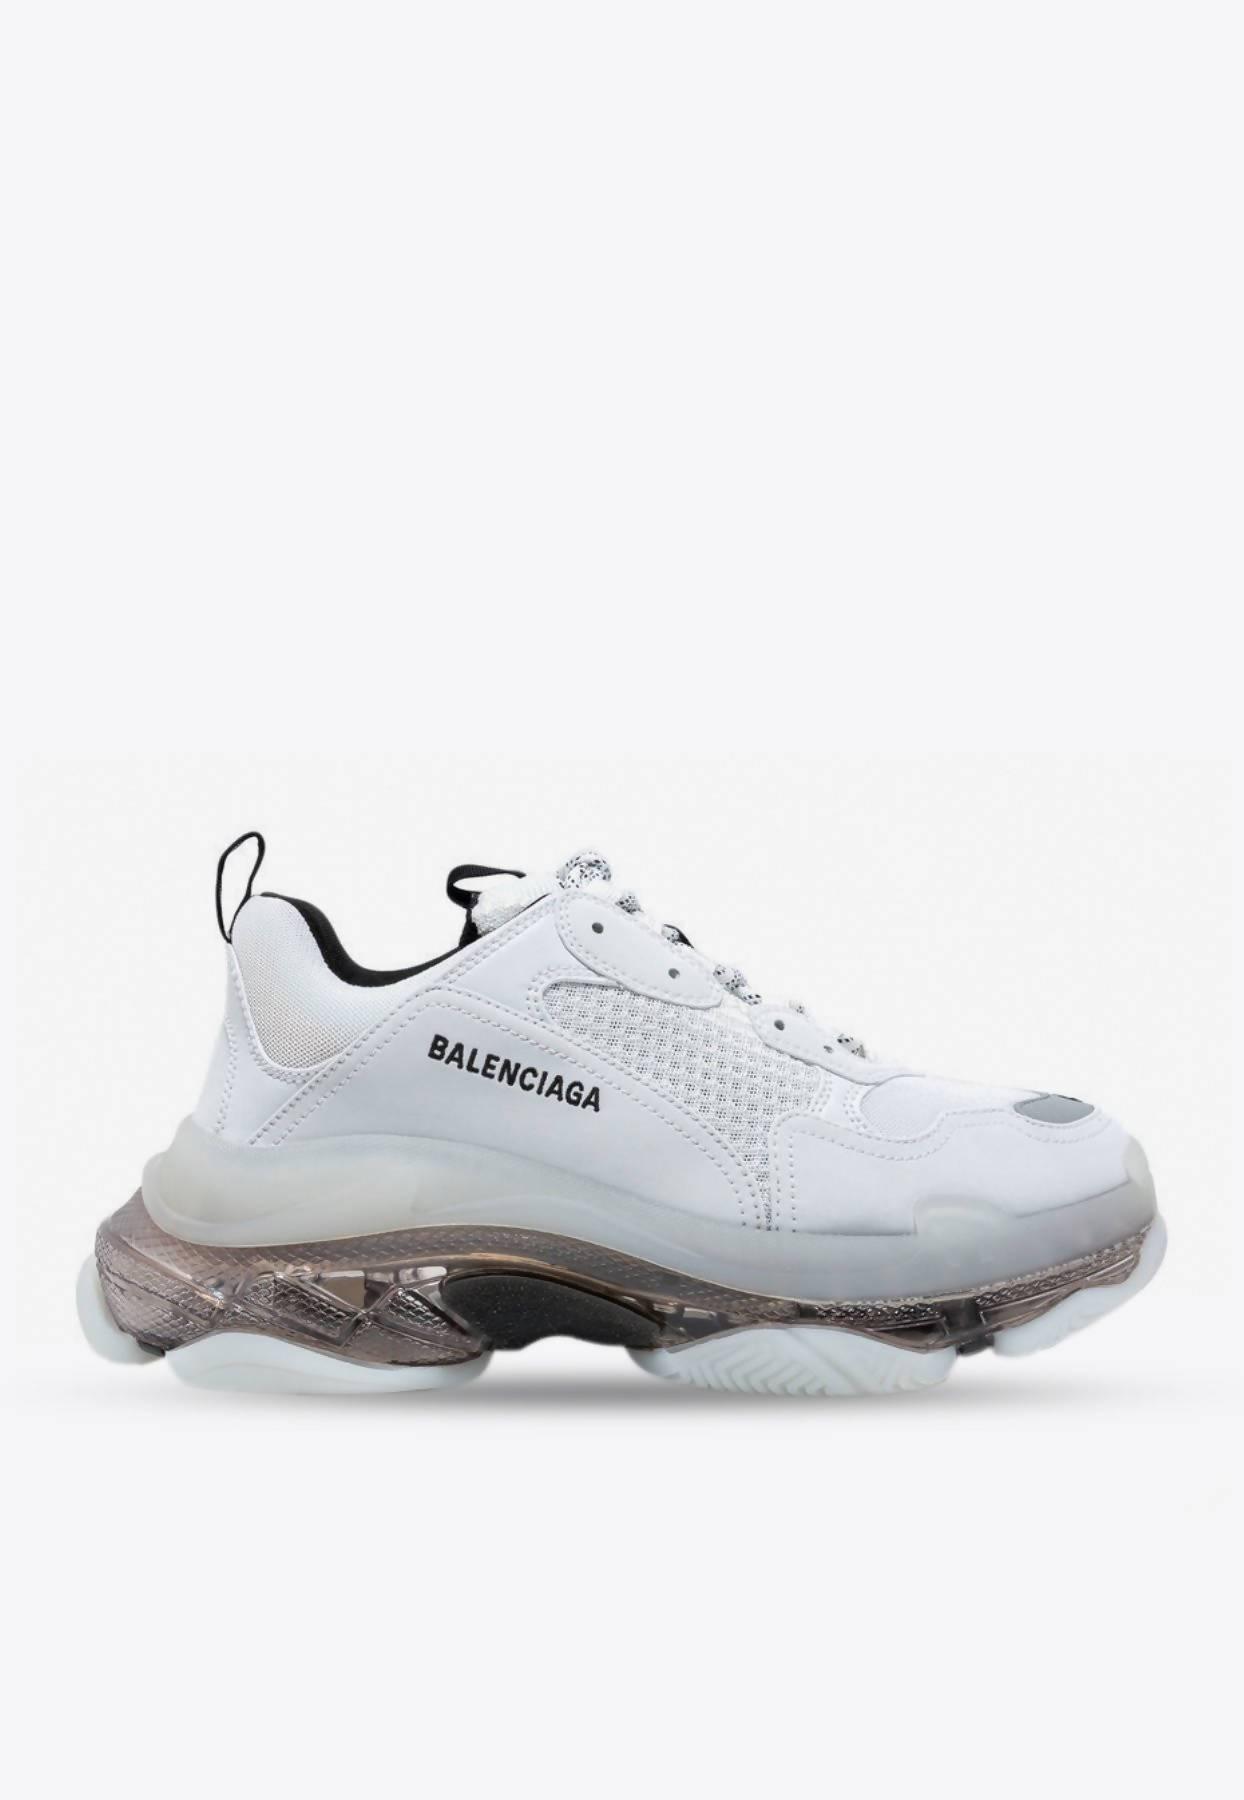 Balenciaga Synthetic Triple S Clear Sole Sneakers In Mesh And Nylon Eu 40  in White for Men - Lyst